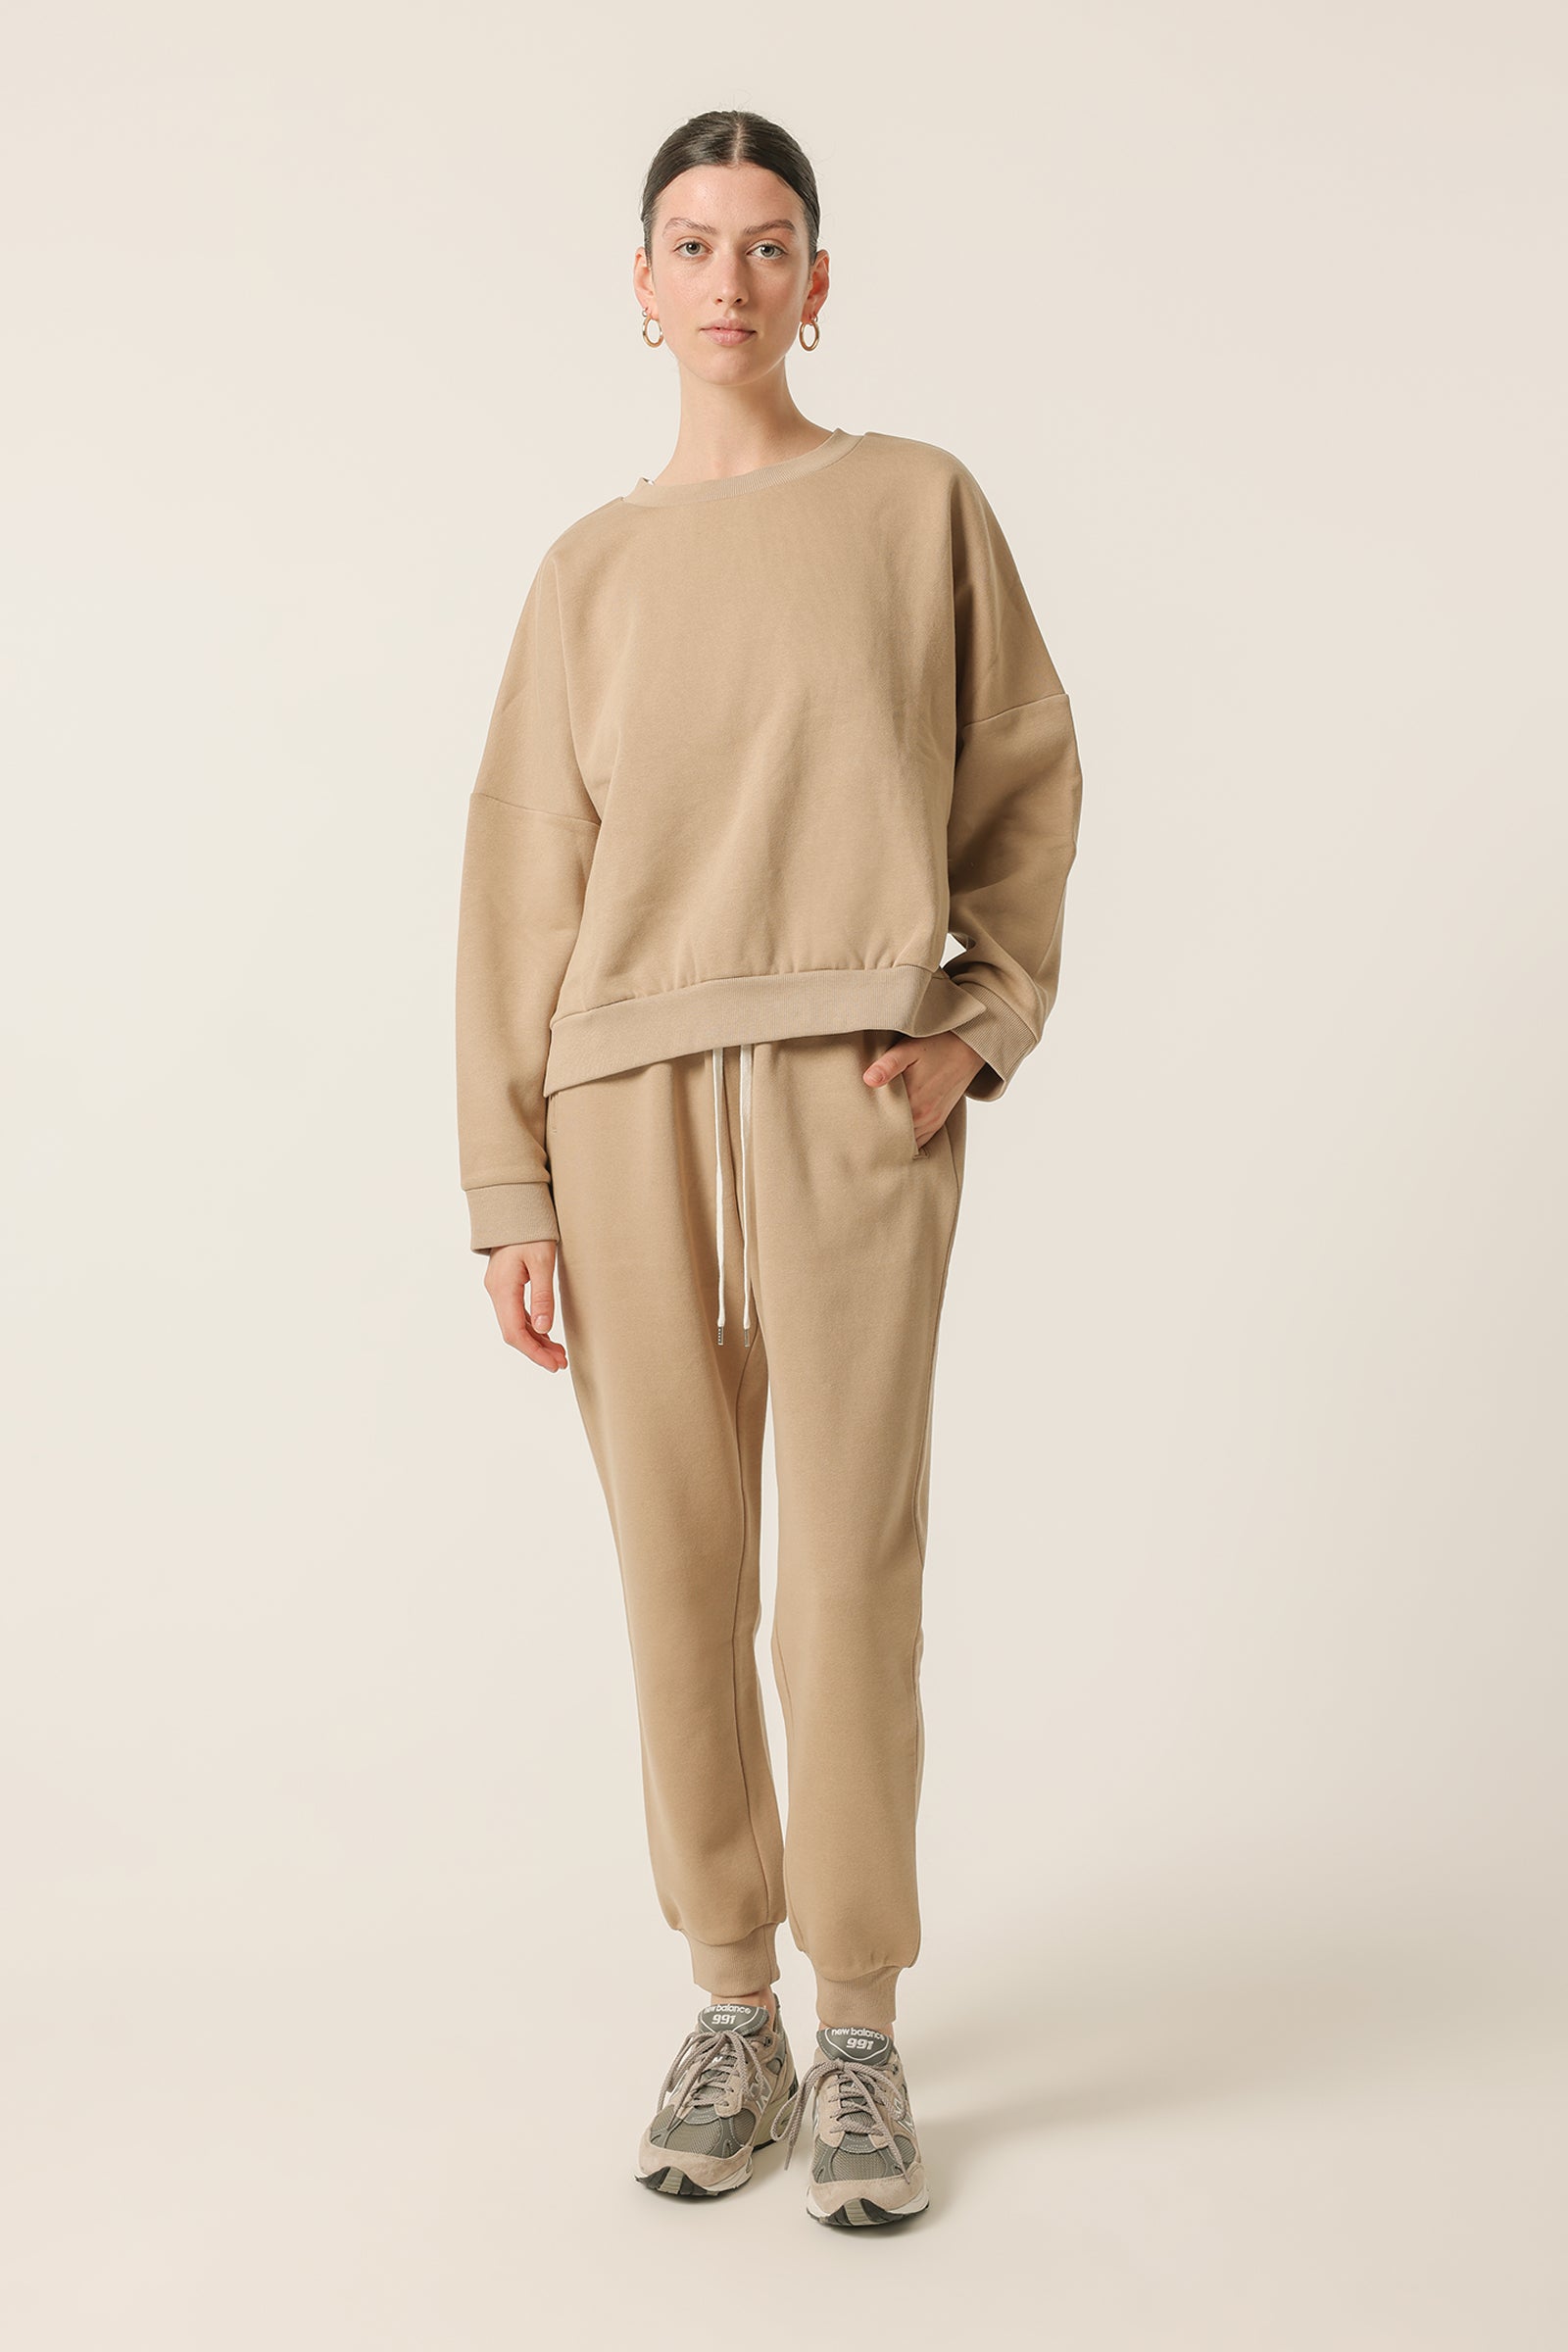 Nude Lucy Carter Classic Oversized Sweat In a Beige Sepia Colour